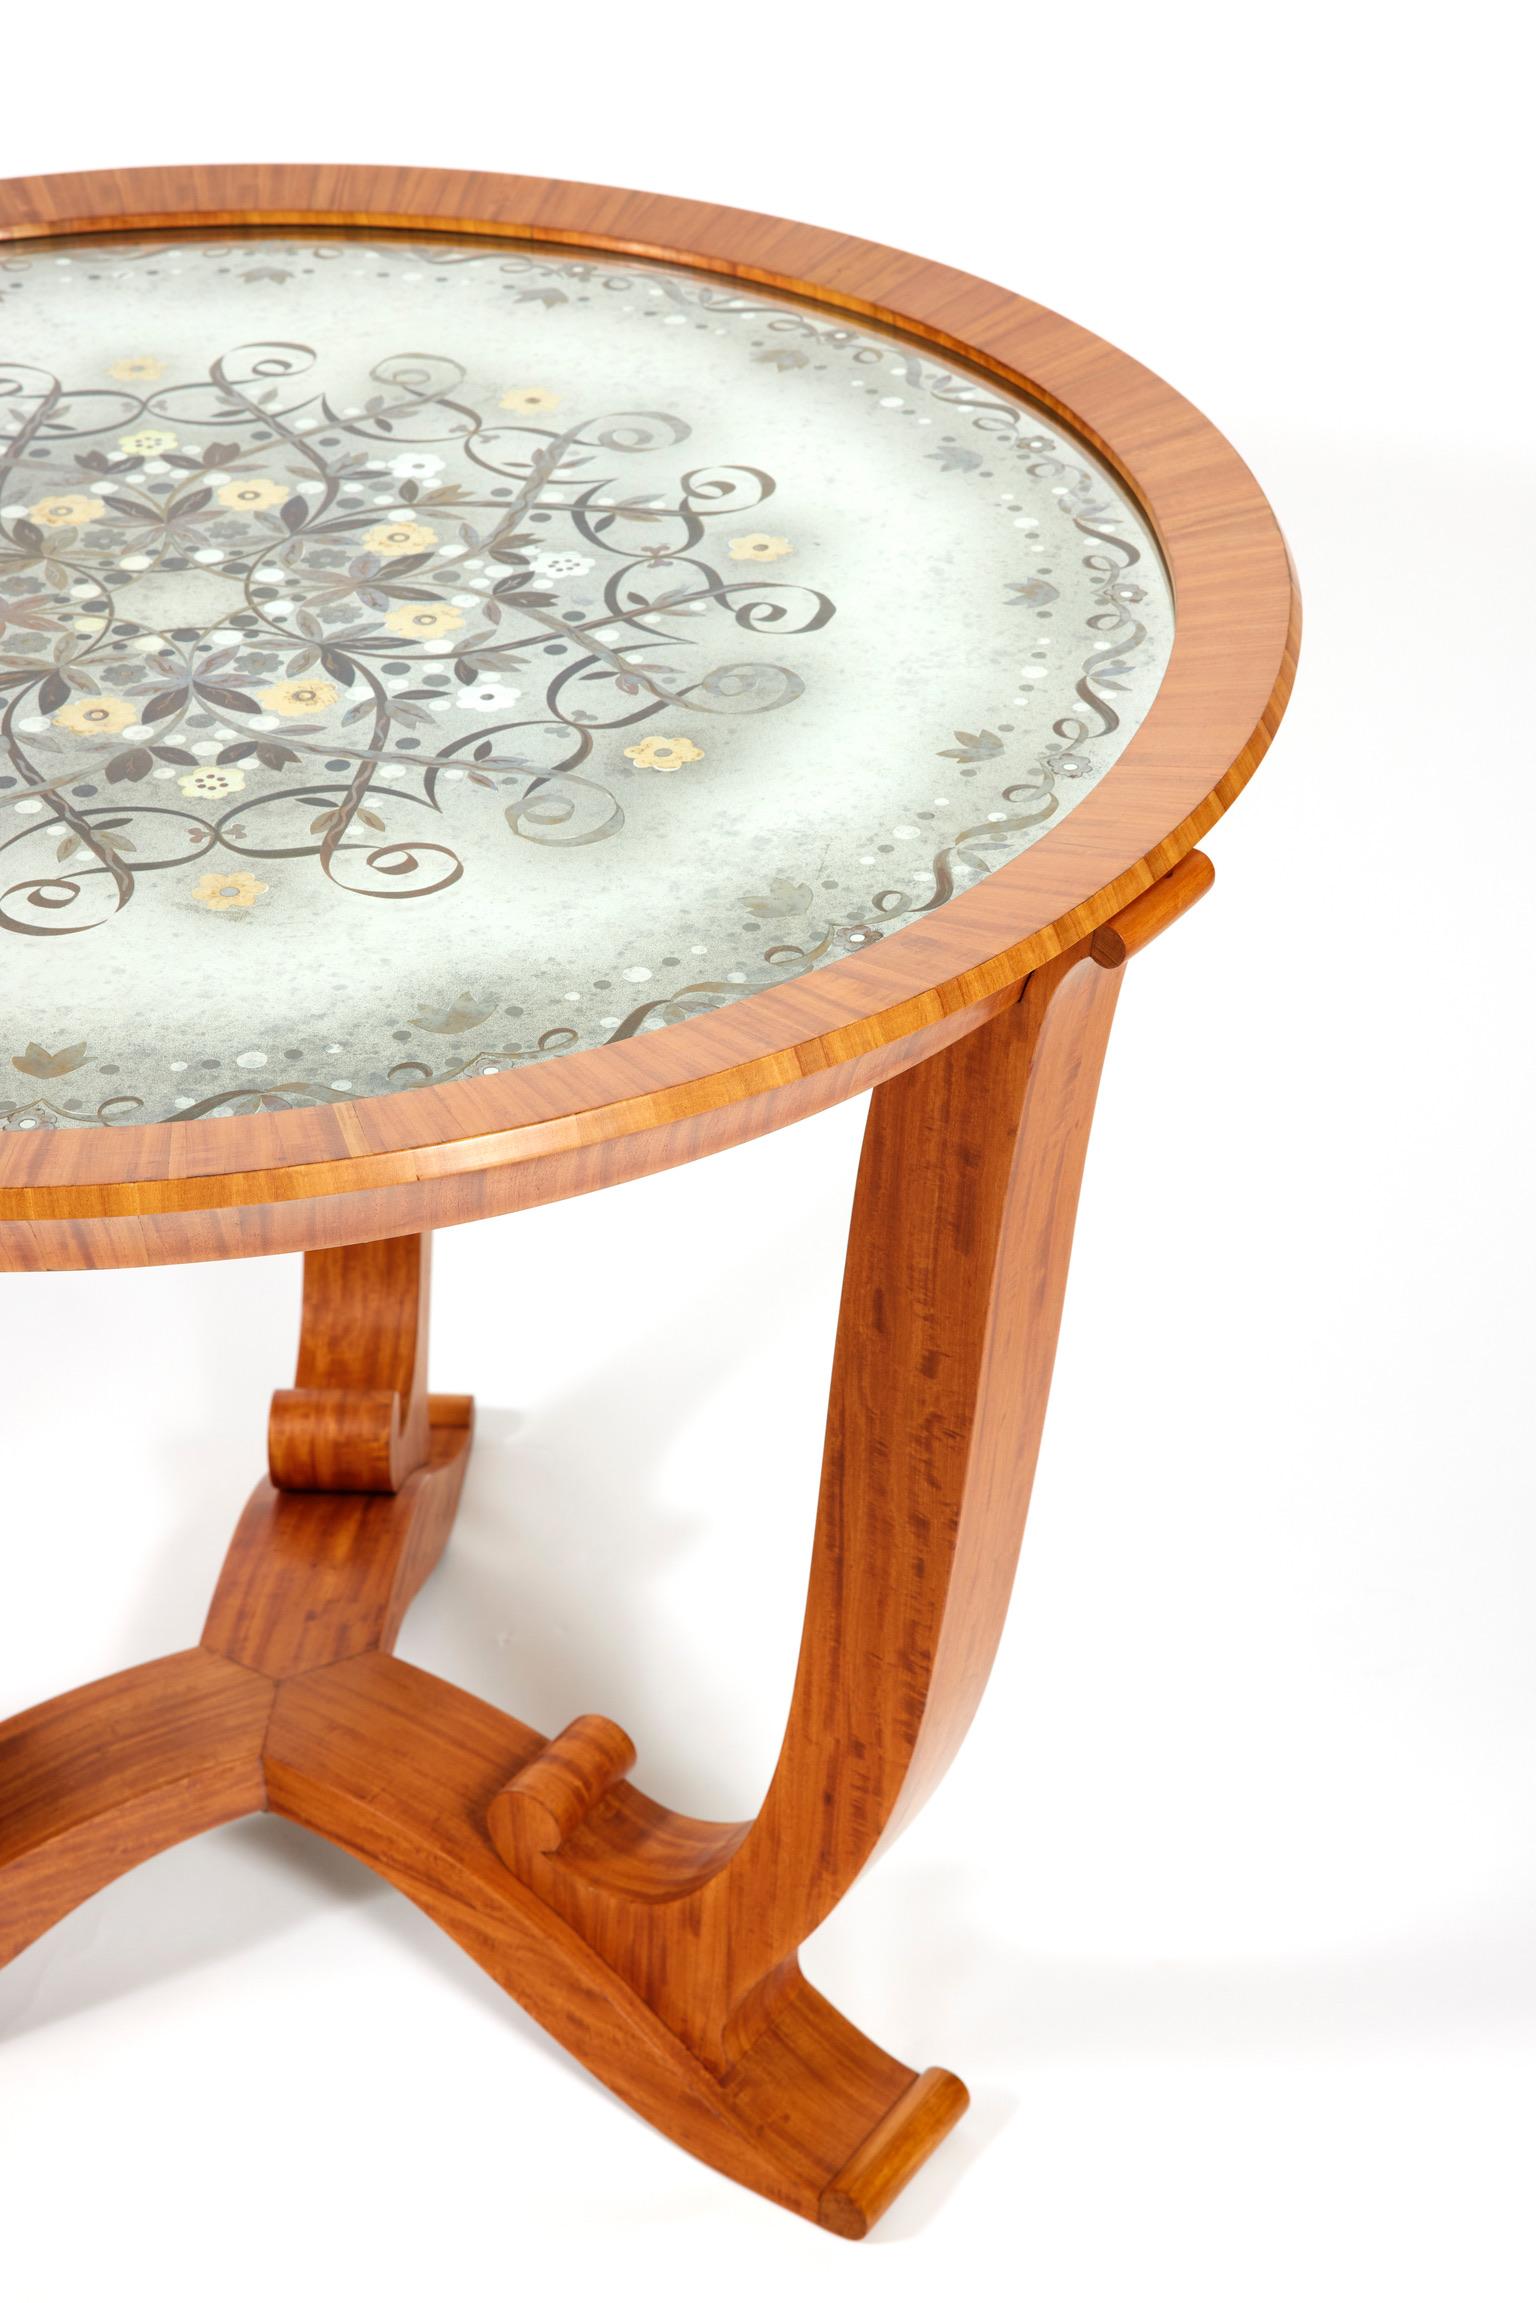 Lemon tree veneer pedestal table with a tripod base and console-shaped feet.
The circular églomisé glass top is decorated with scrolls and stylized flowers in golden leaves.
Signed on an ivory plaque “J. Leleu”.